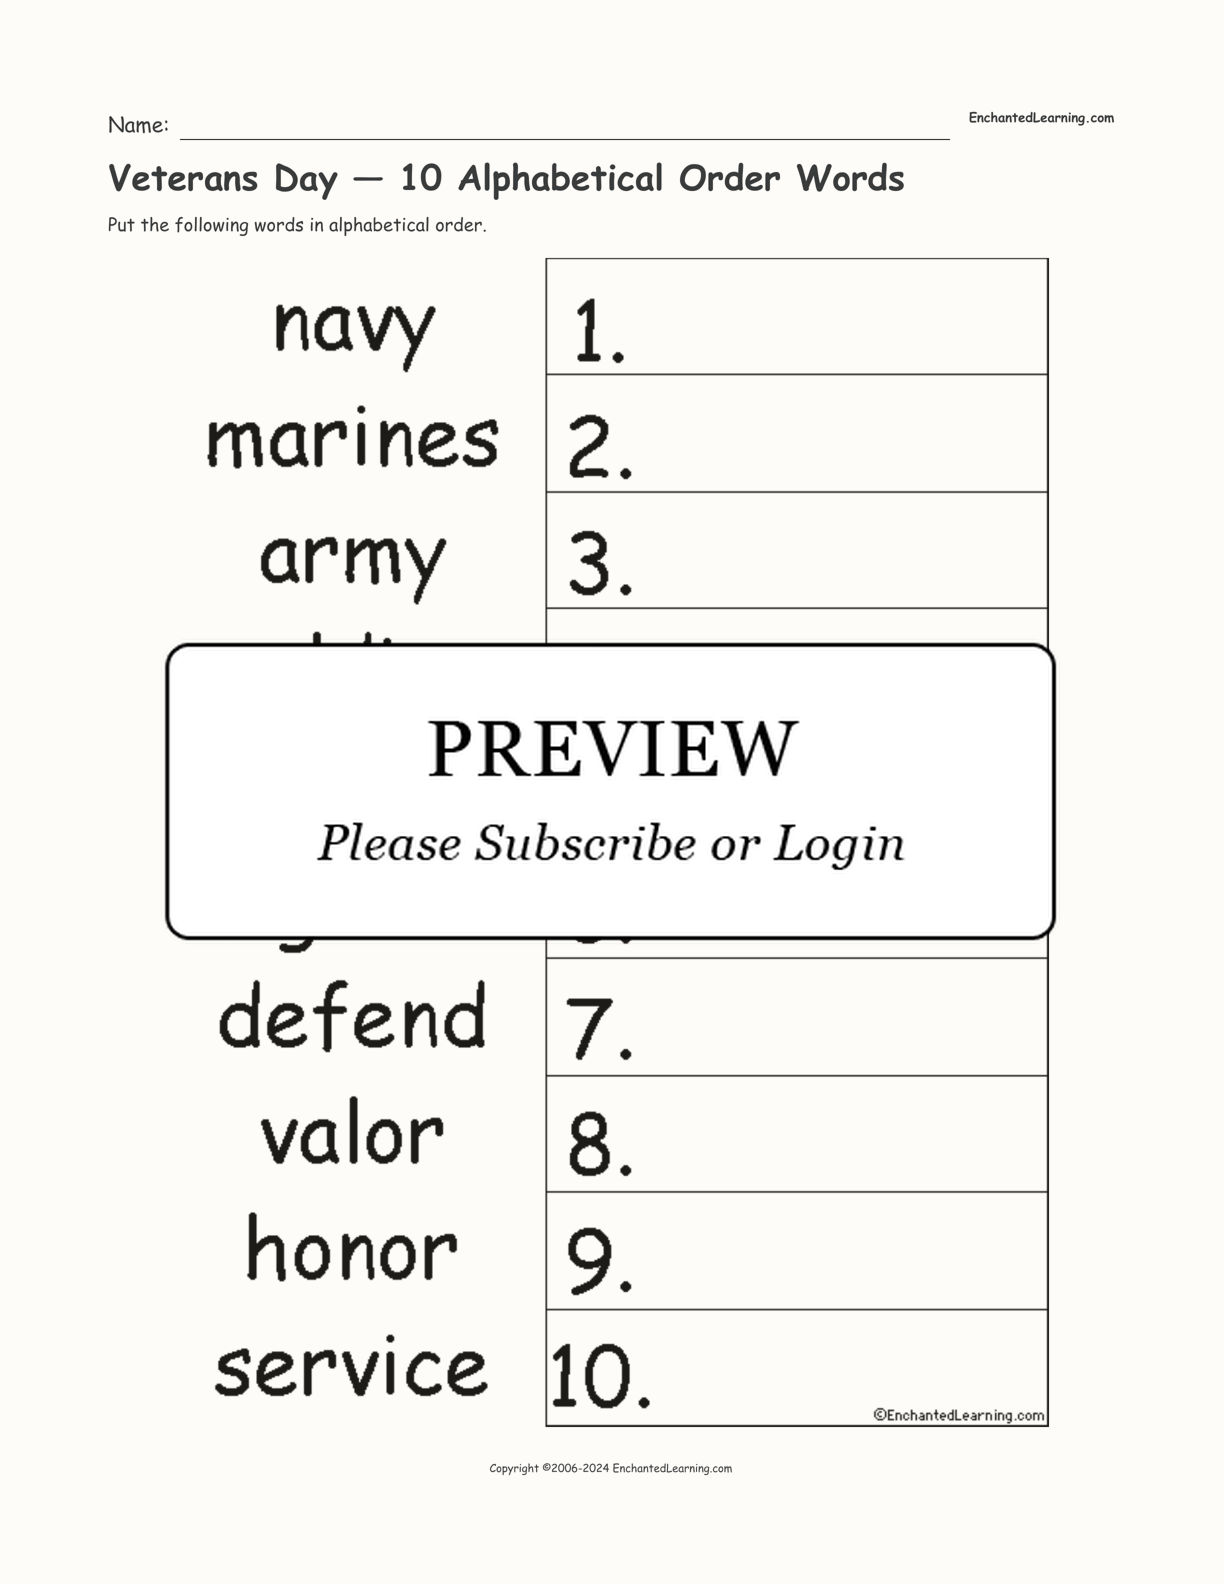 Veterans Day — 10 Alphabetical Order Words interactive worksheet page 1